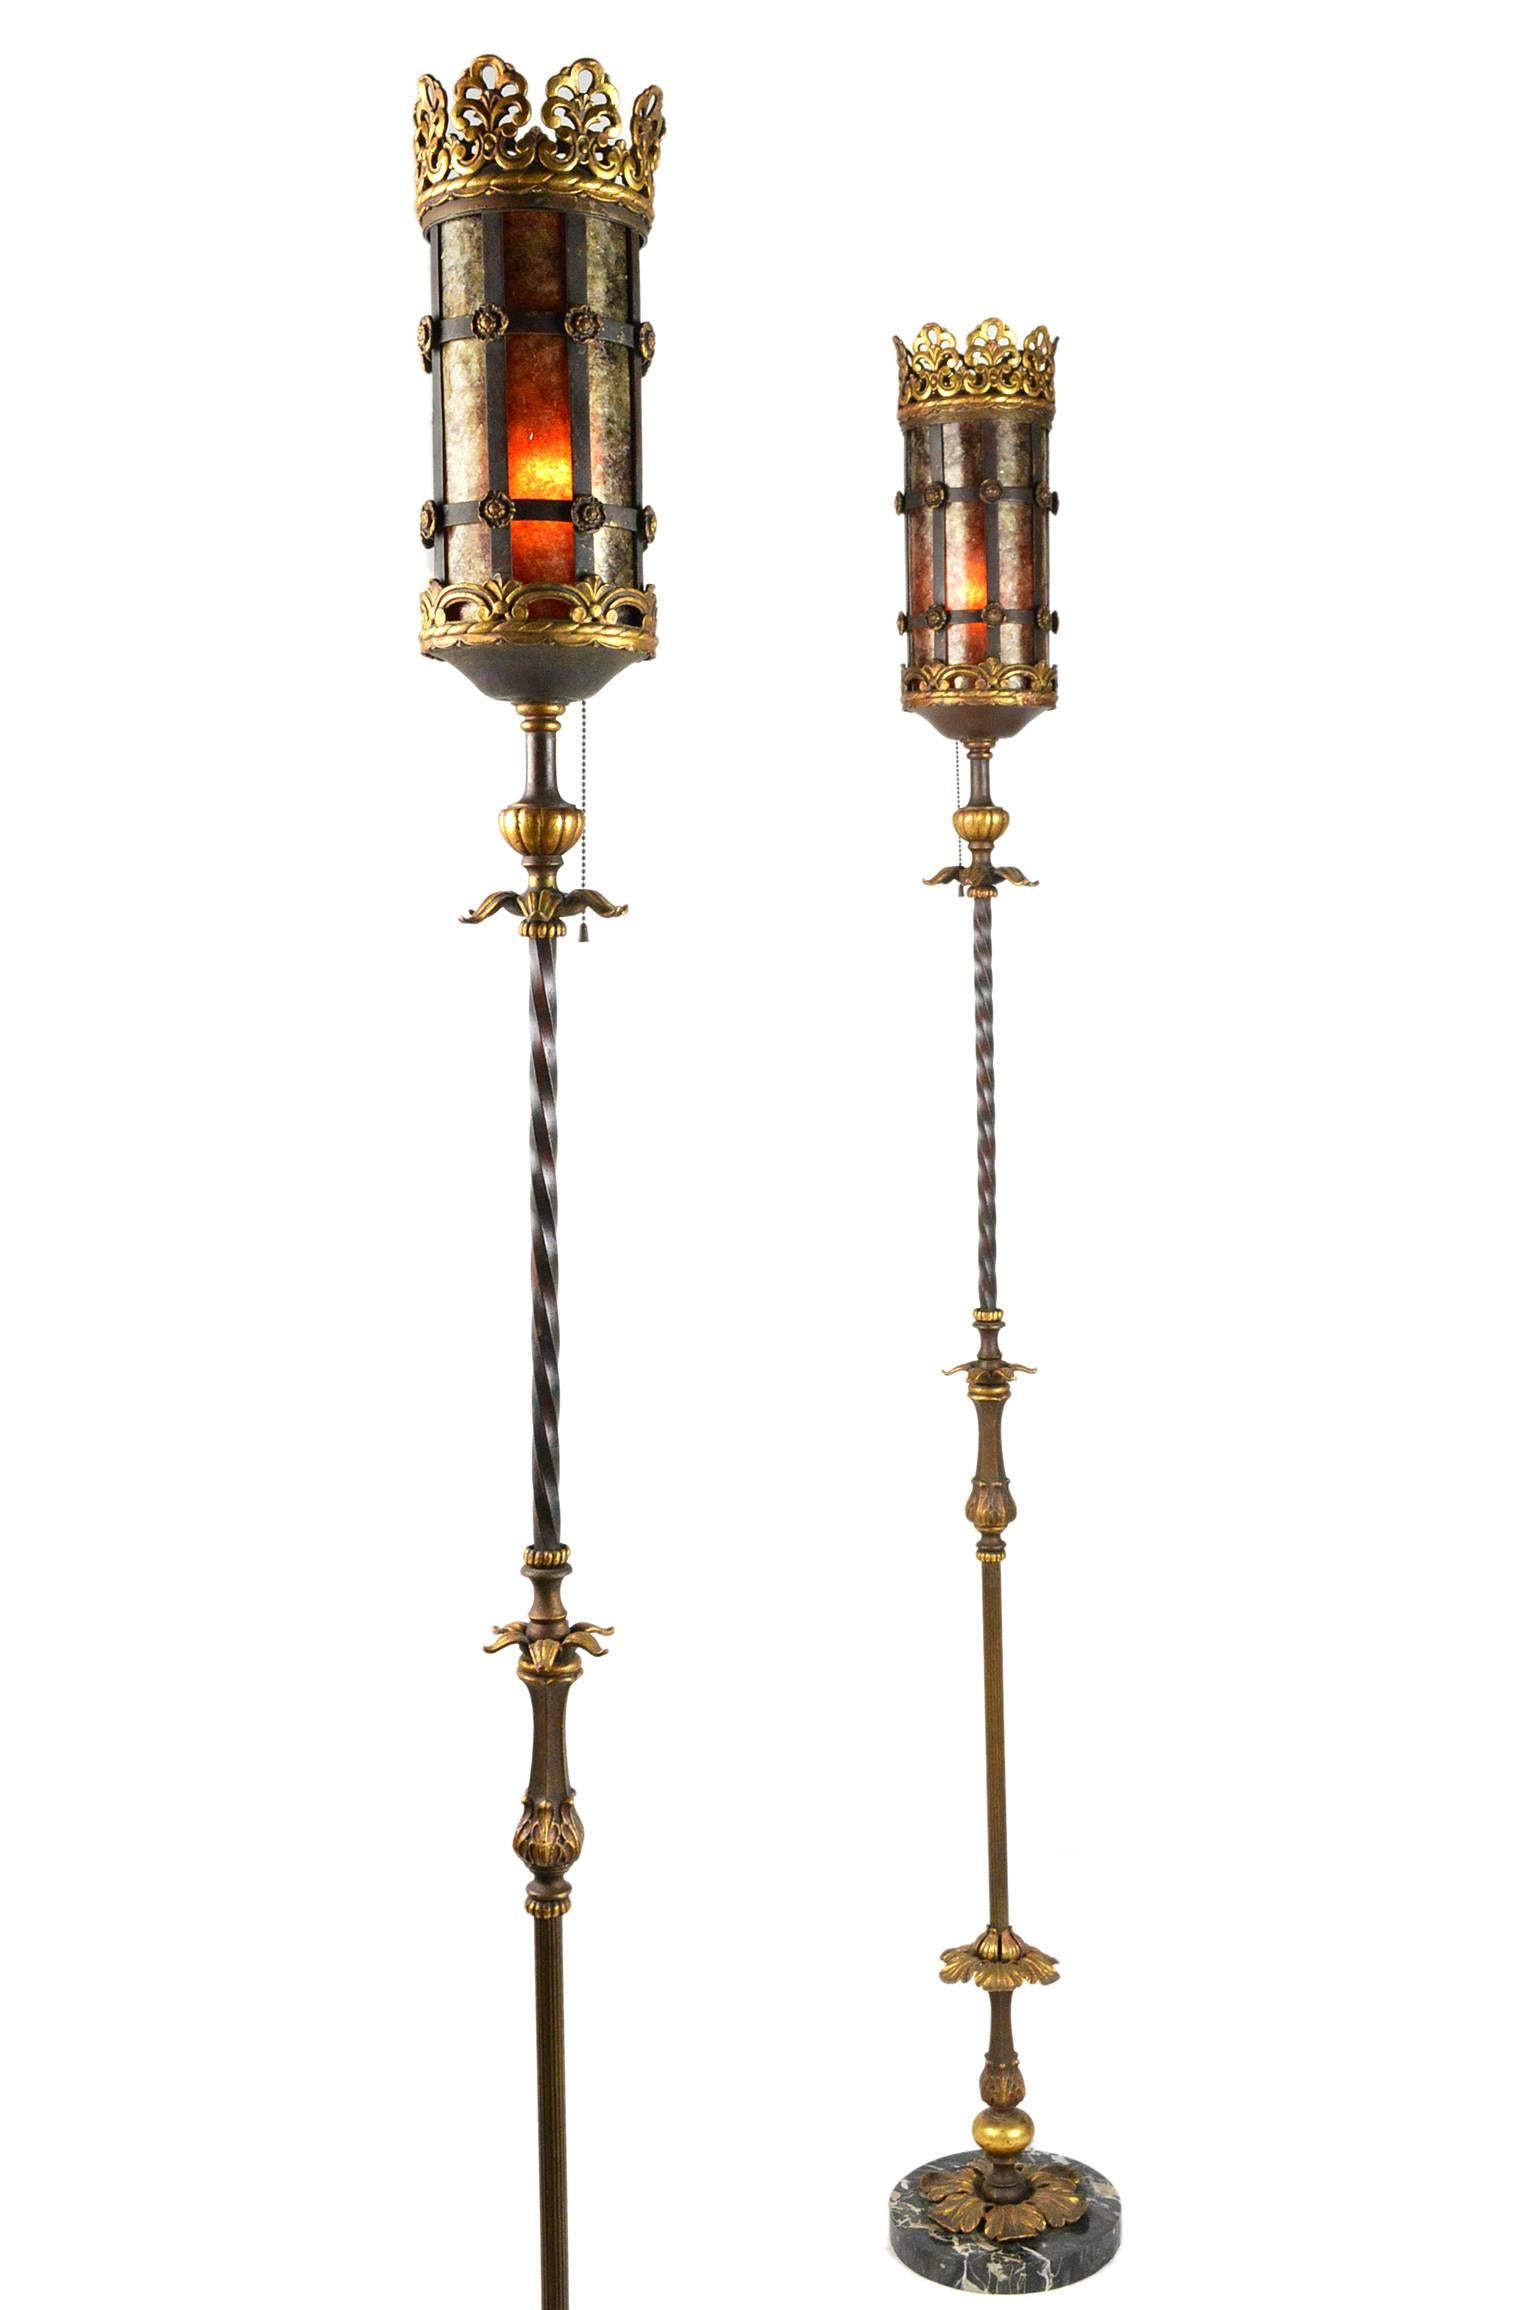 Pair of early 20th century Oscar Bach style floor lamps. Raised on marble bases, made of iron, with a polychrome painted gilt finish throughout. Having beautiful cylindrical mica shades.